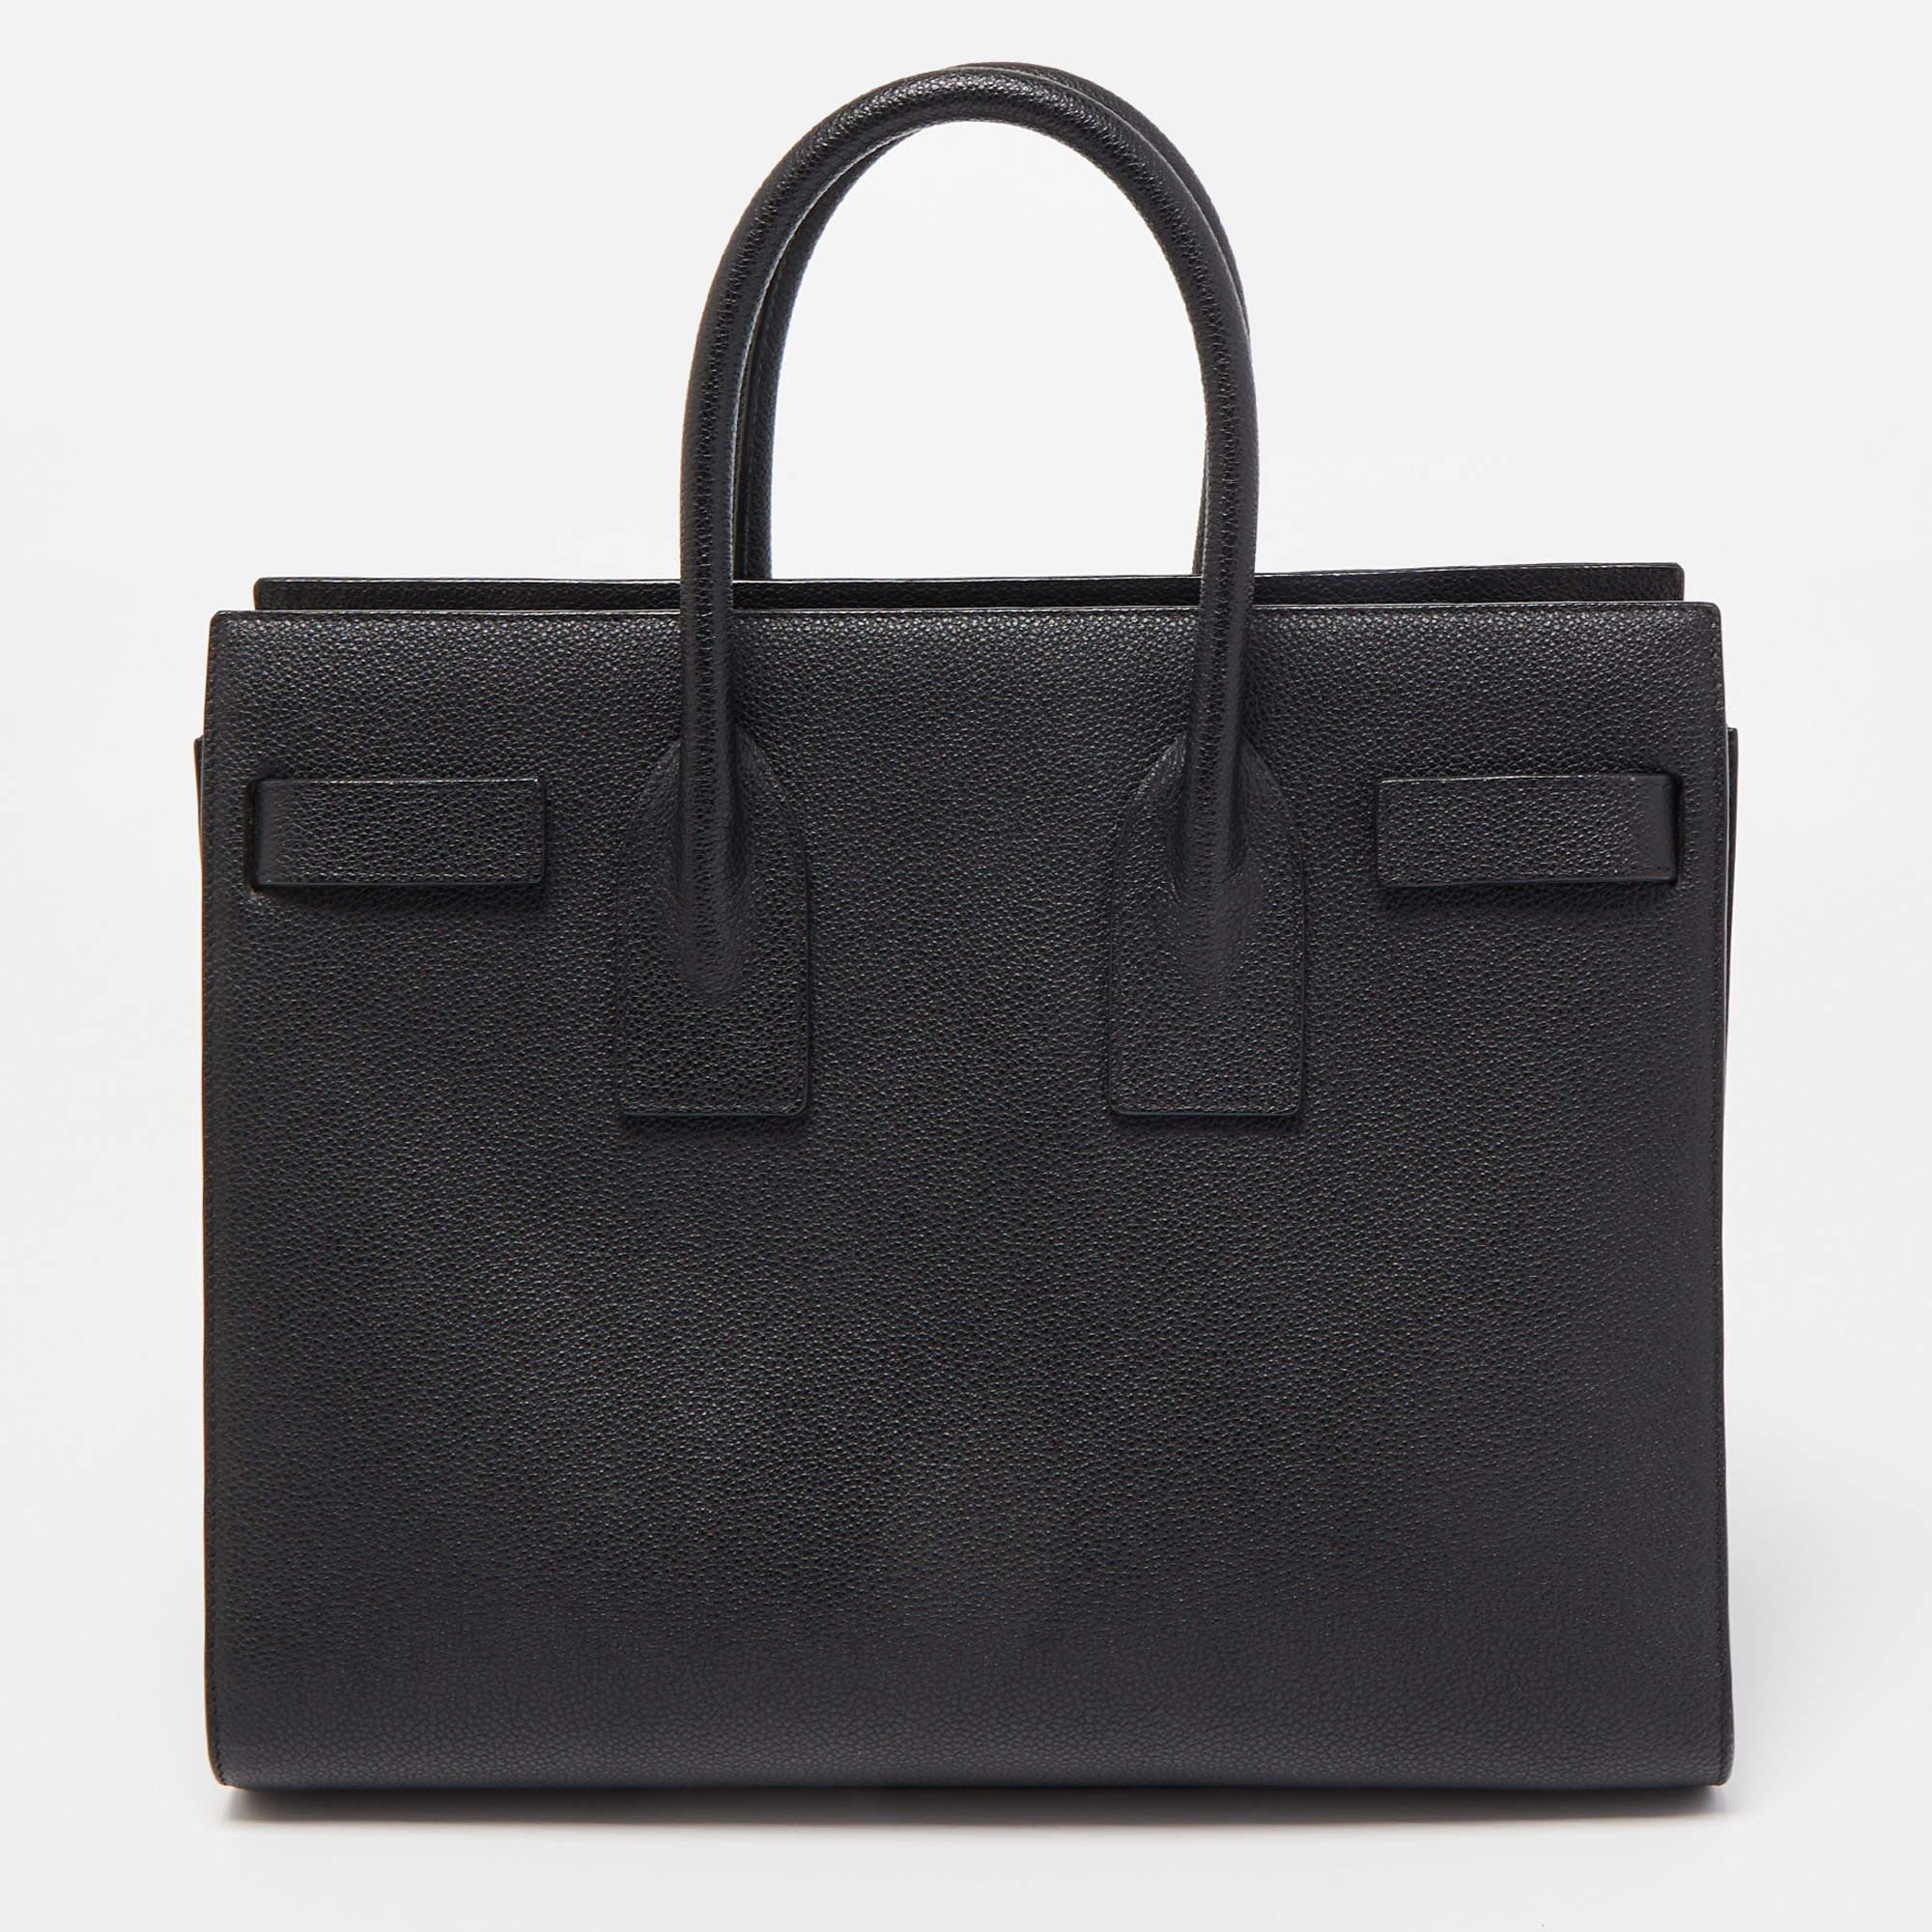 The Saint Laurent Classic Sac De Jour tote is an elegant and timeless handbag. Crafted from high-quality grain leather, it features a sleek black color, top handles, a removable shoulder strap, and the brand's signature accordion sides. The interior